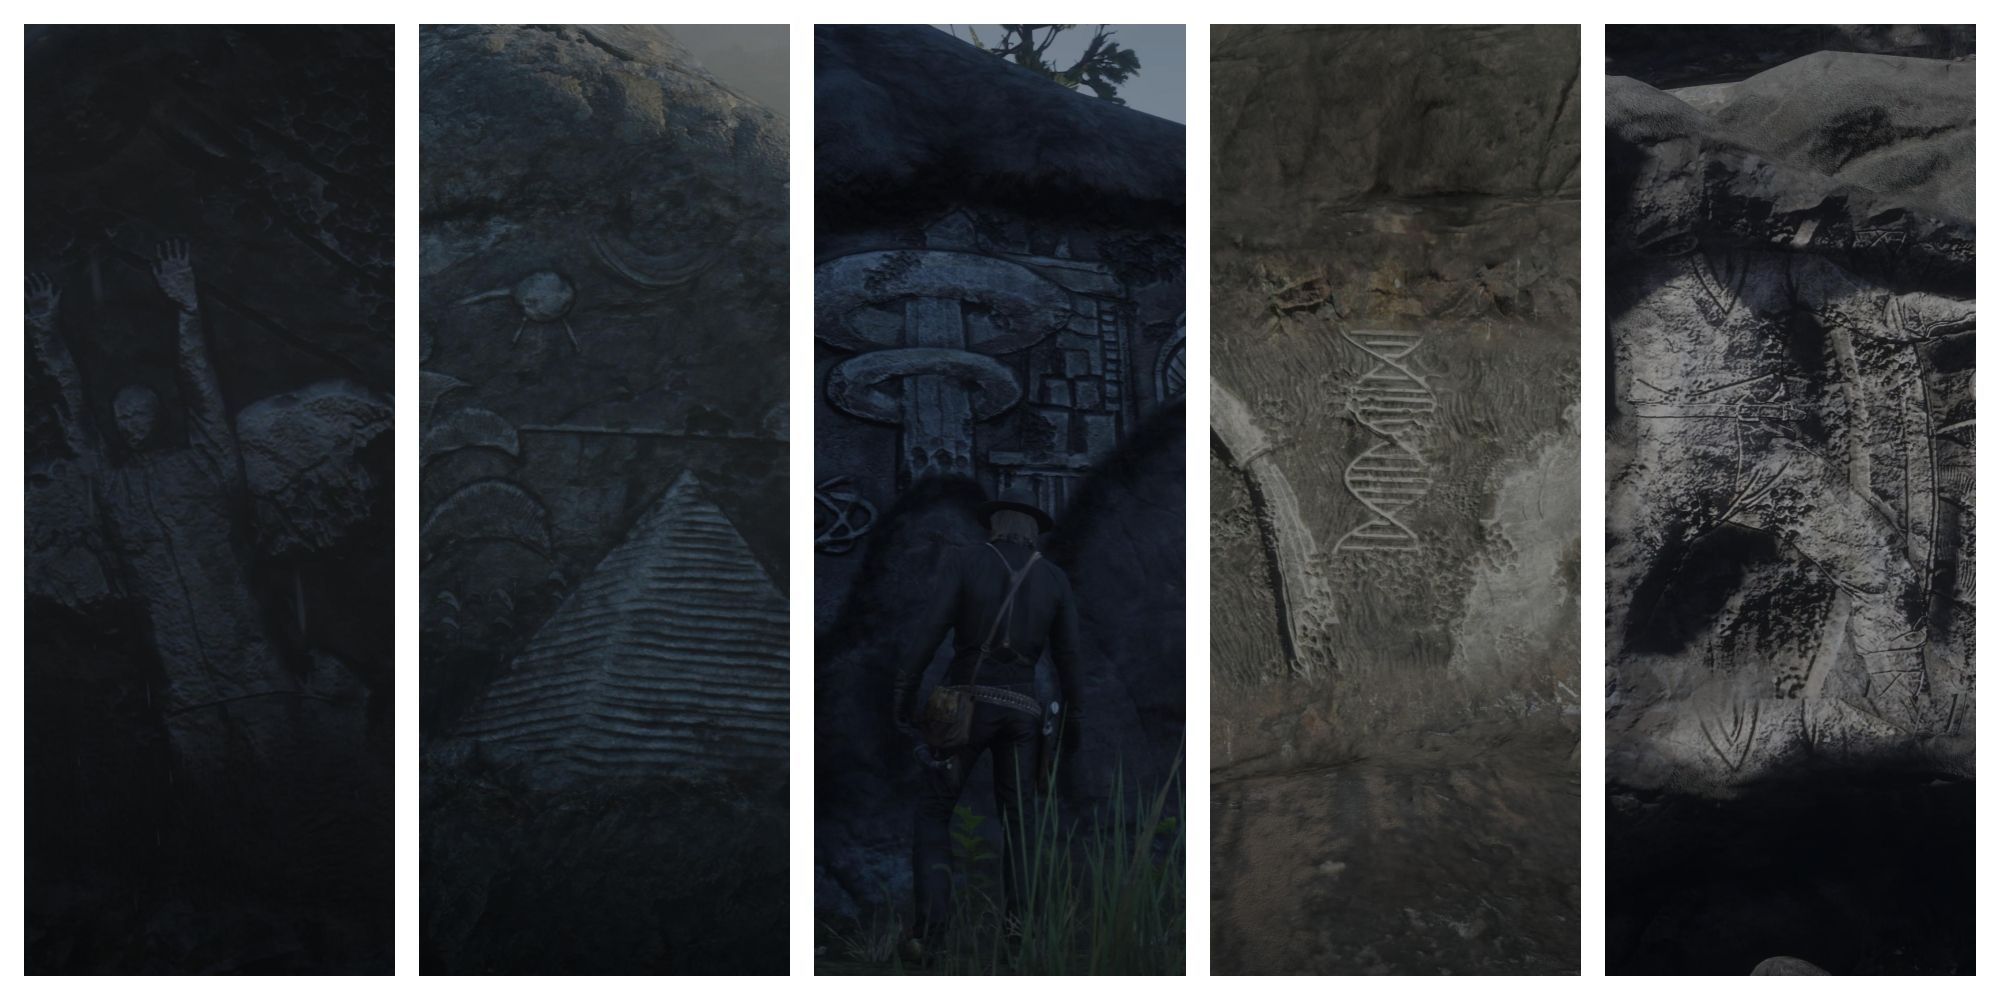 rdr2 rock carving featured